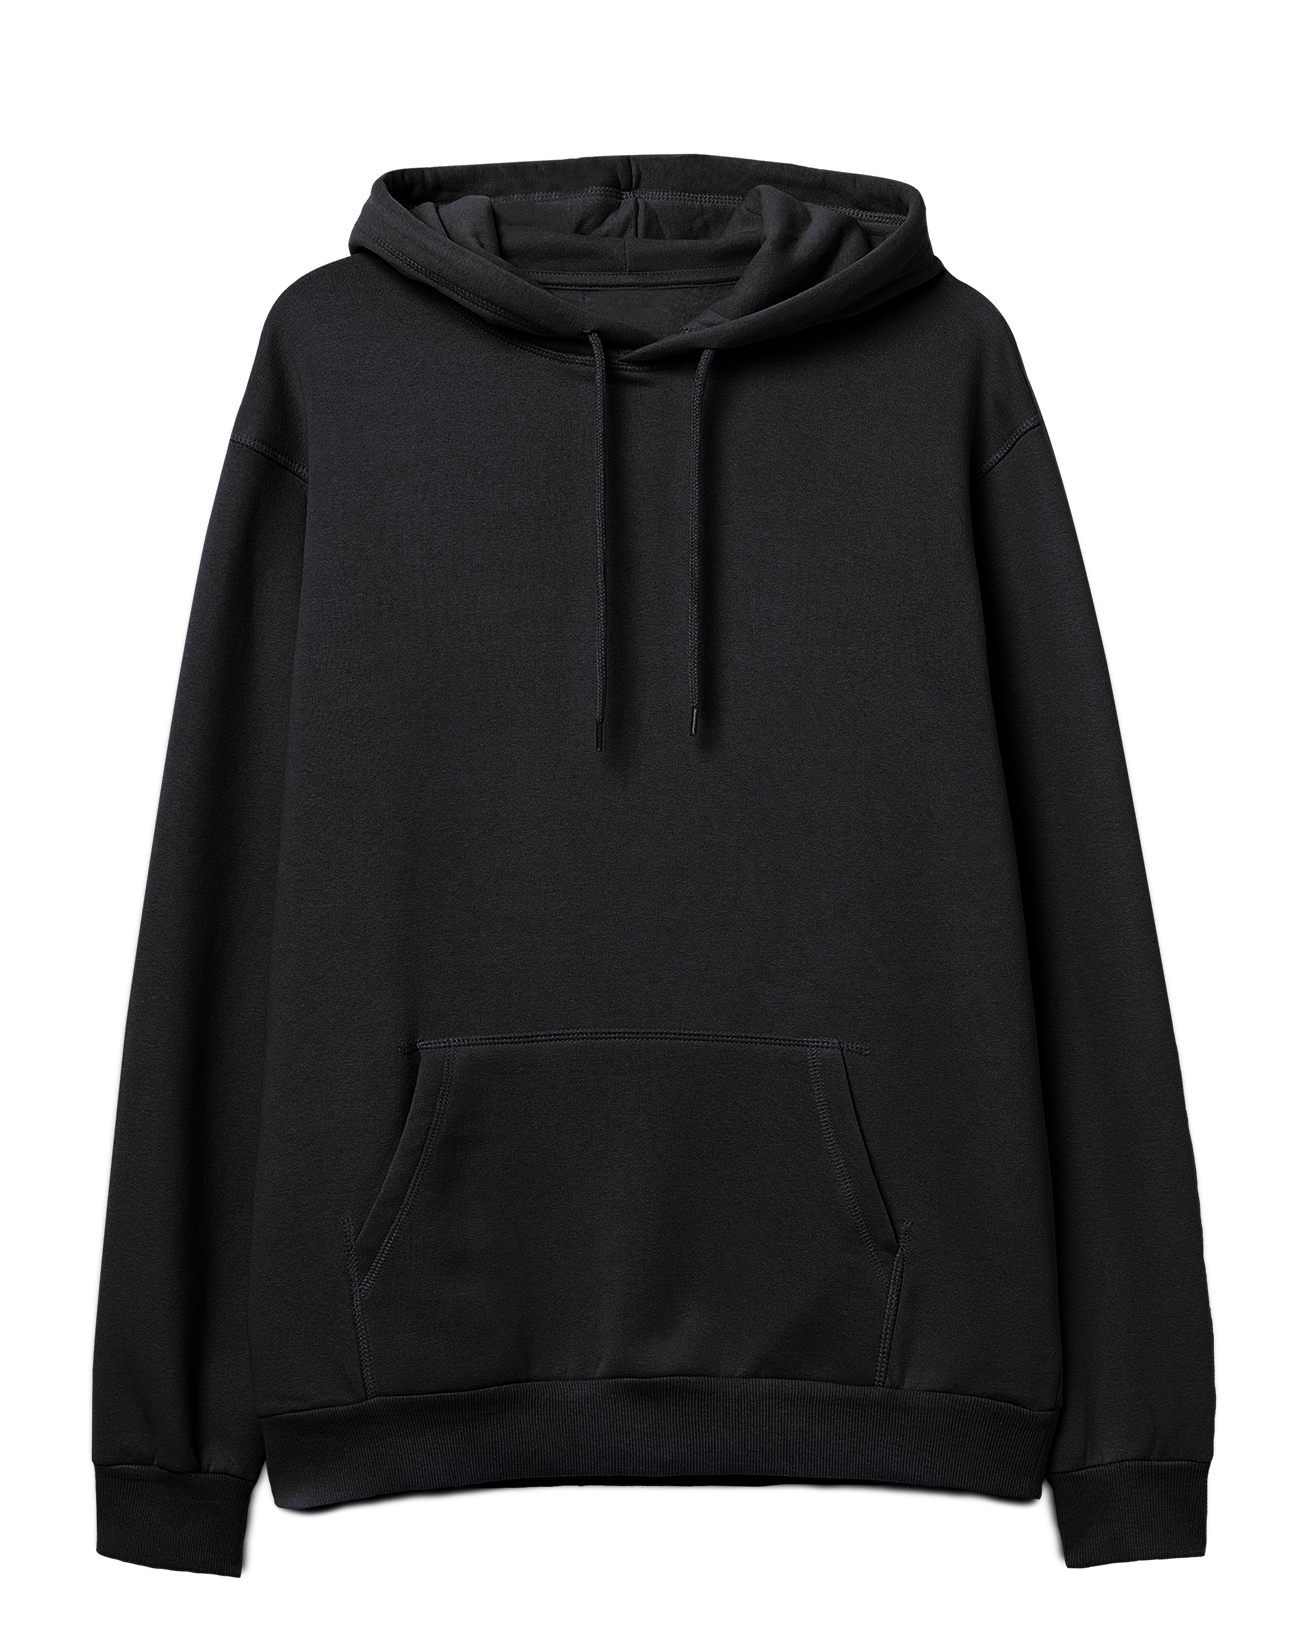 Our Privacy unisex hoodie